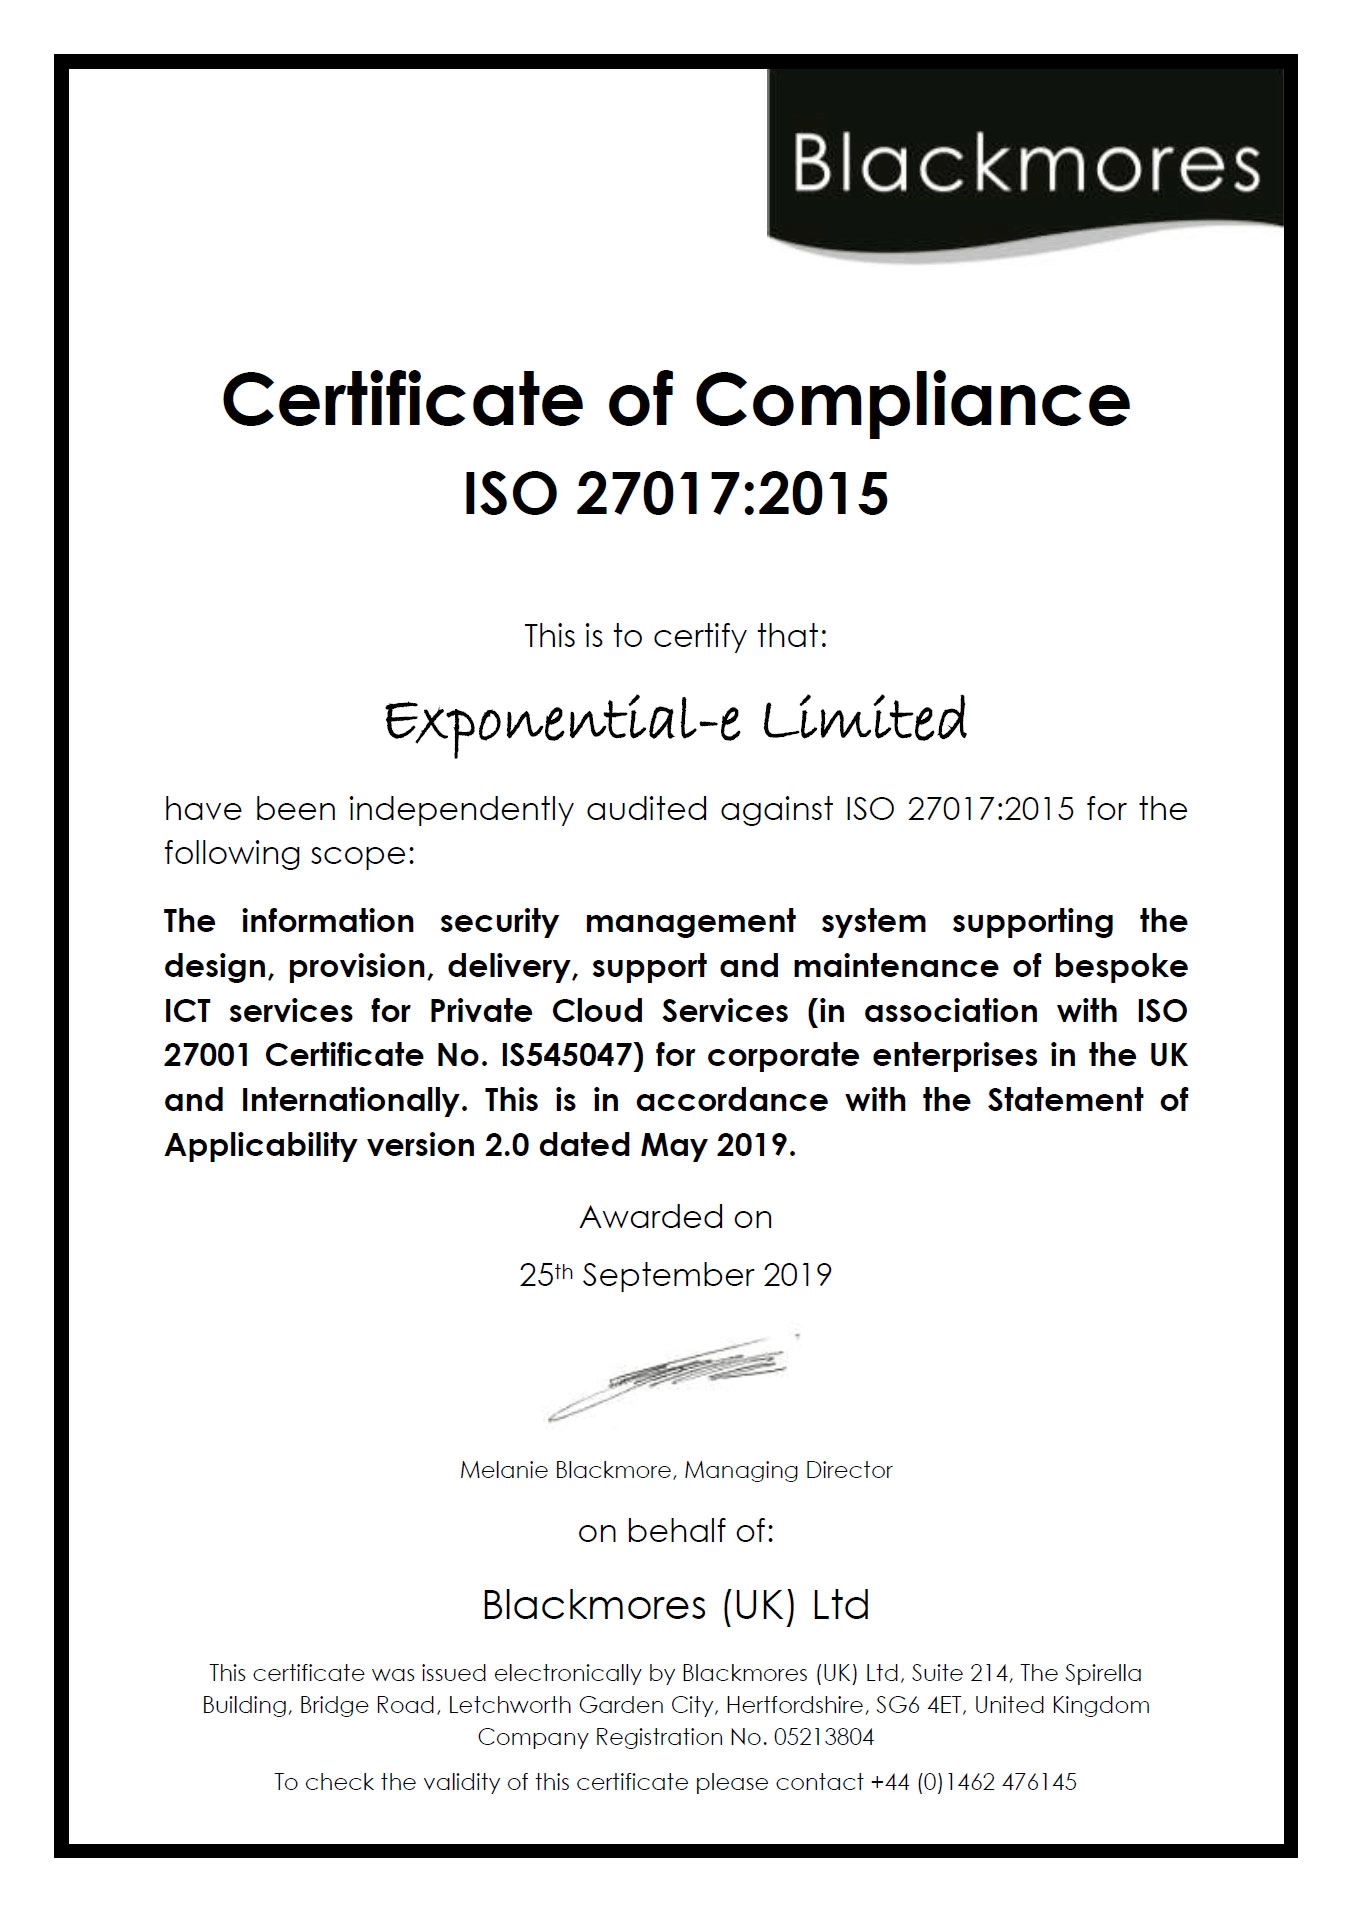 iso-27017-2015-information-technology-security-controls-for-cloud-services.webp